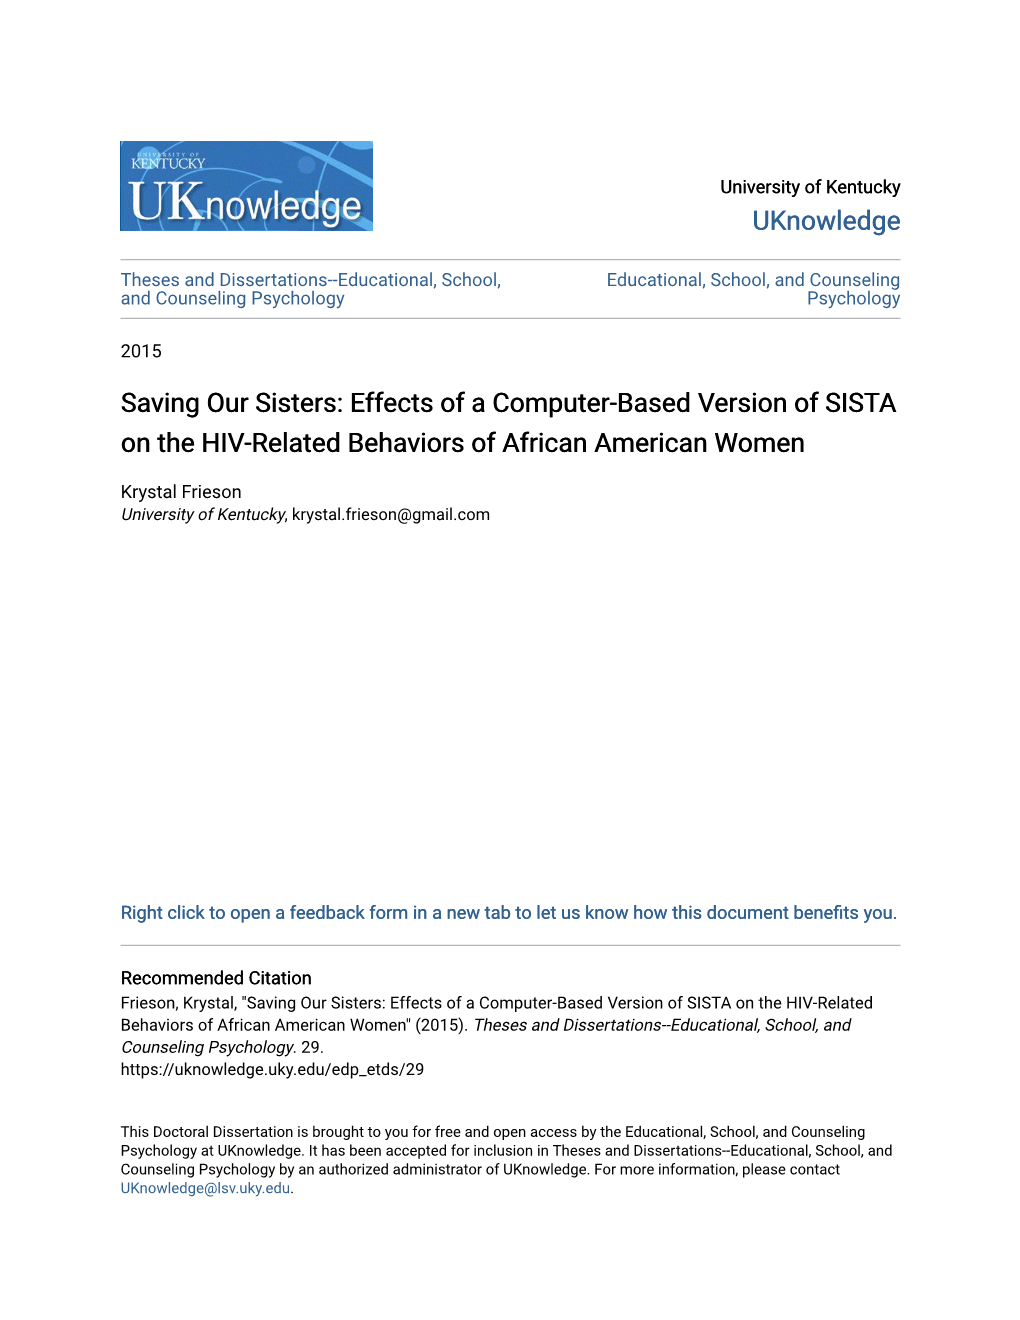 Effects of a Computer-Based Version of SISTA on the HIV-Related Behaviors of African American Women